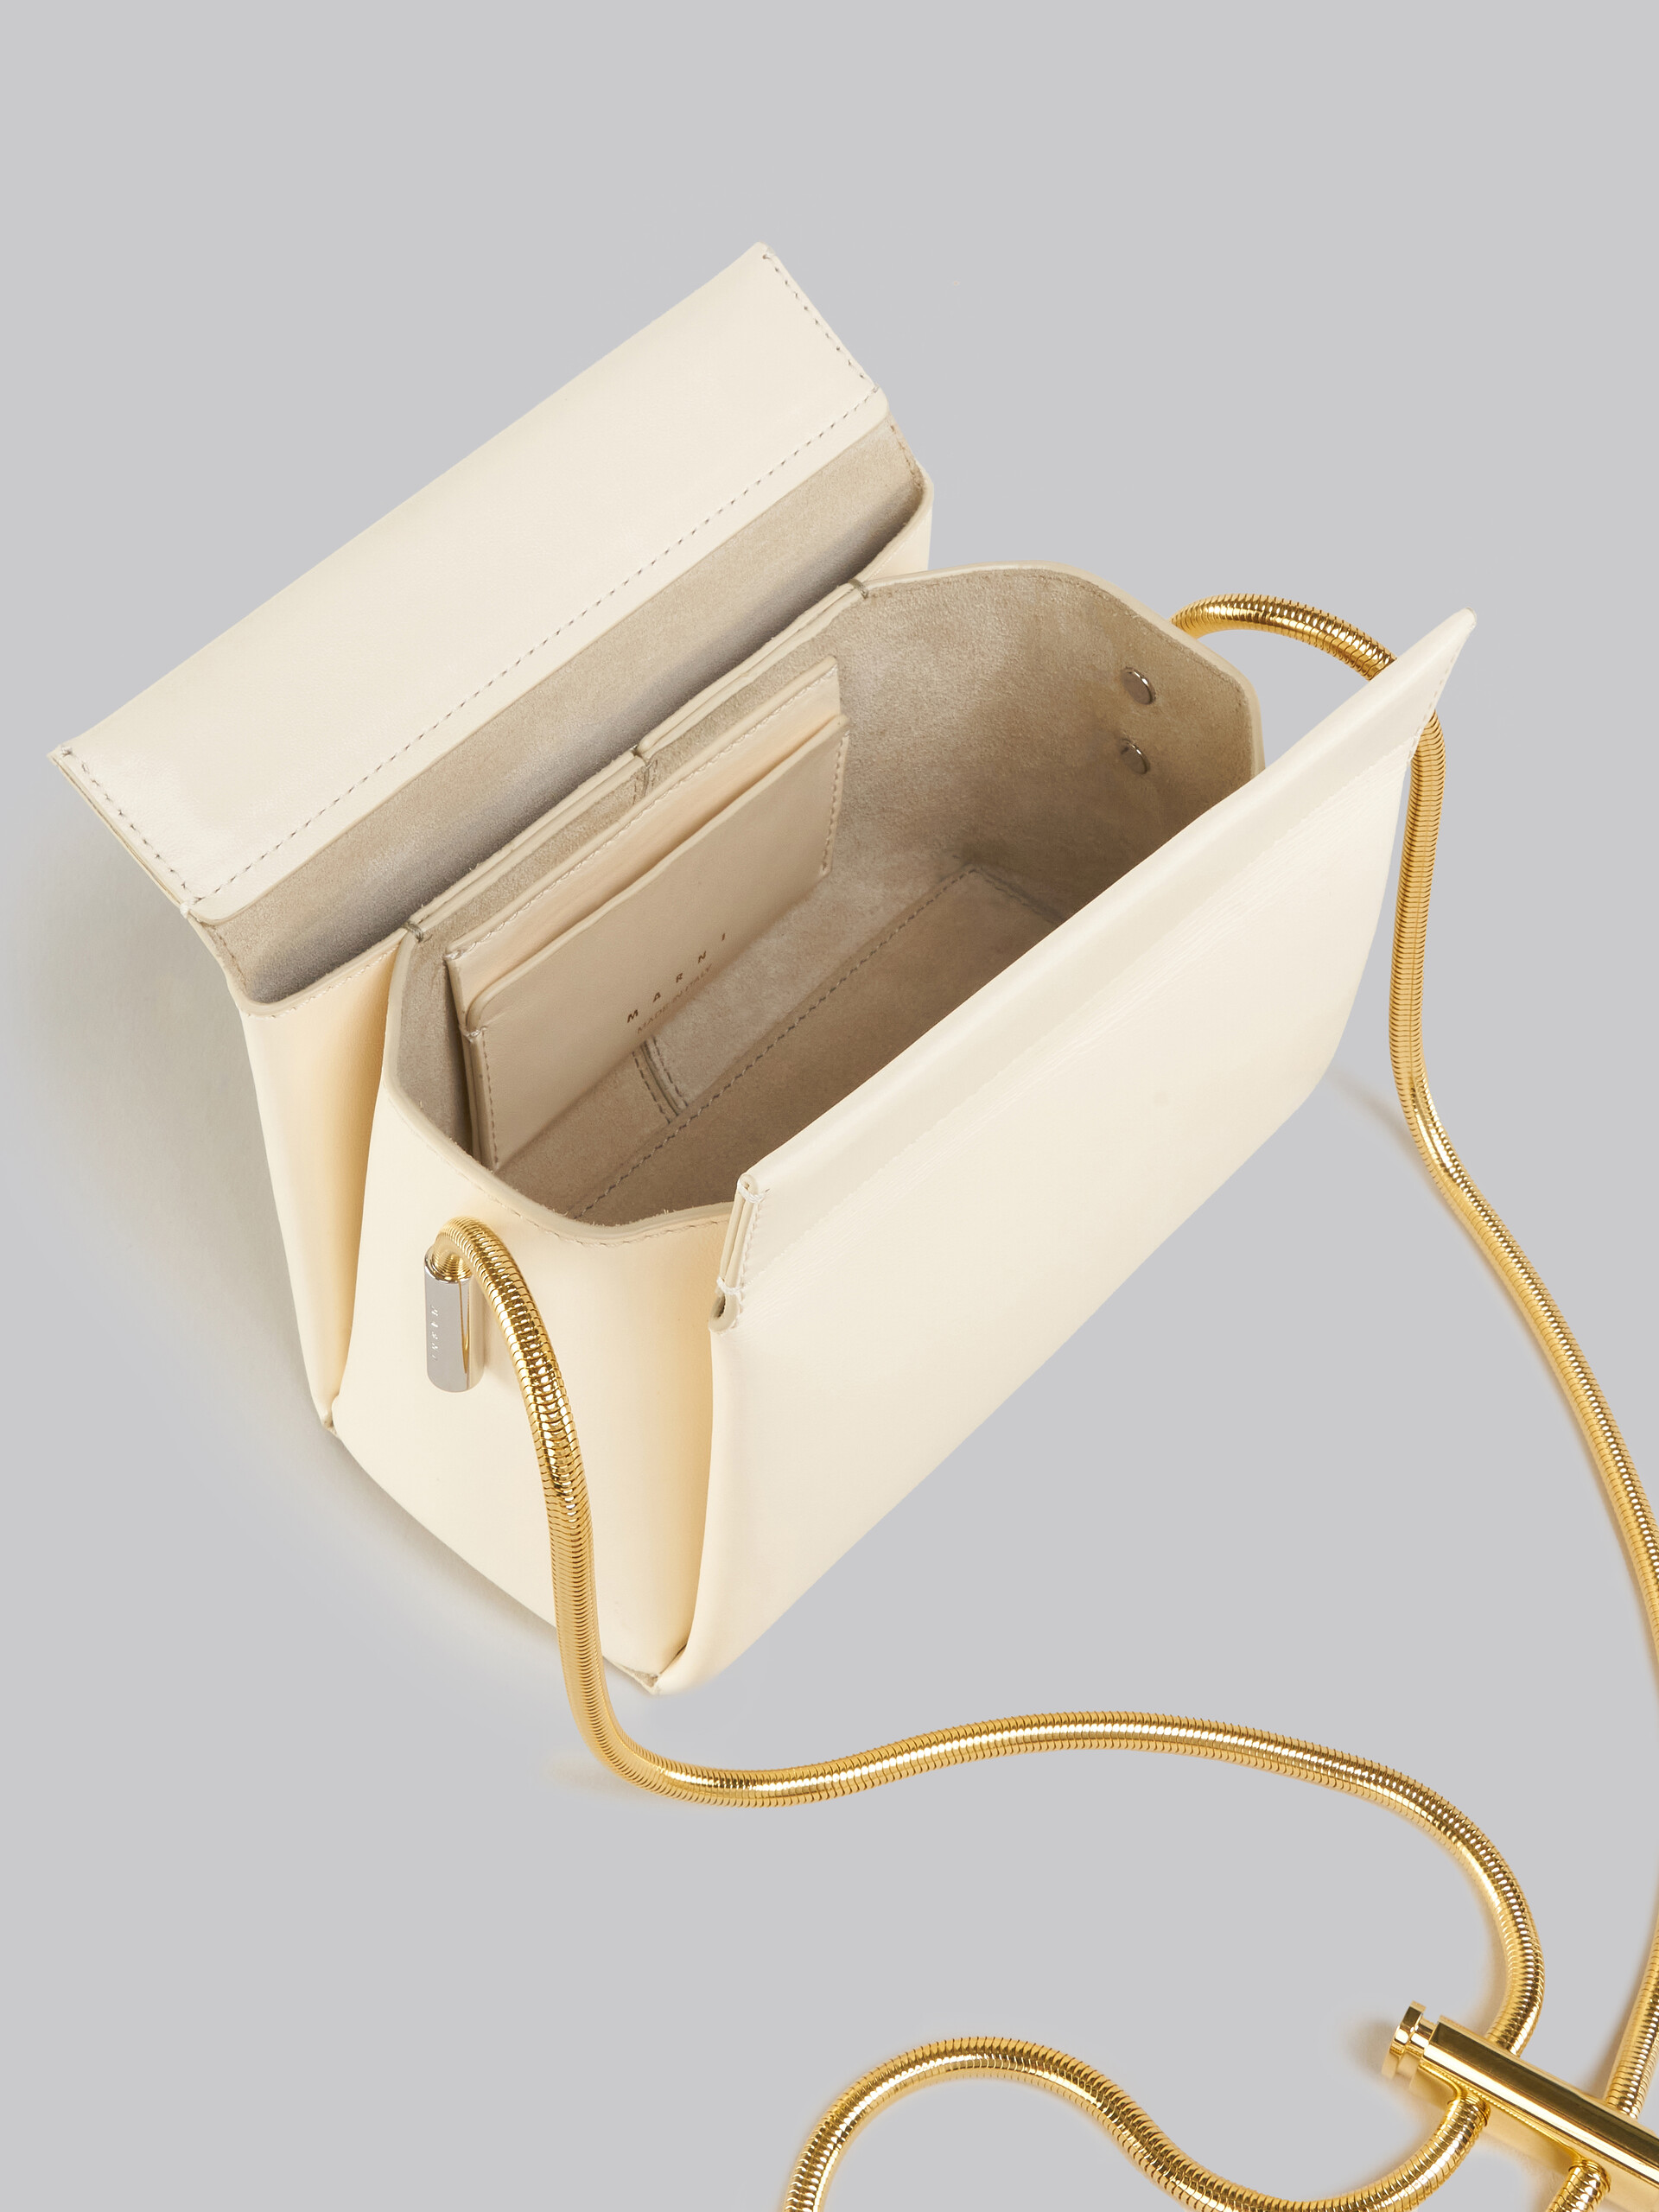 Toggle Small Bag in ivory white leather - Shoulder Bag - Image 3